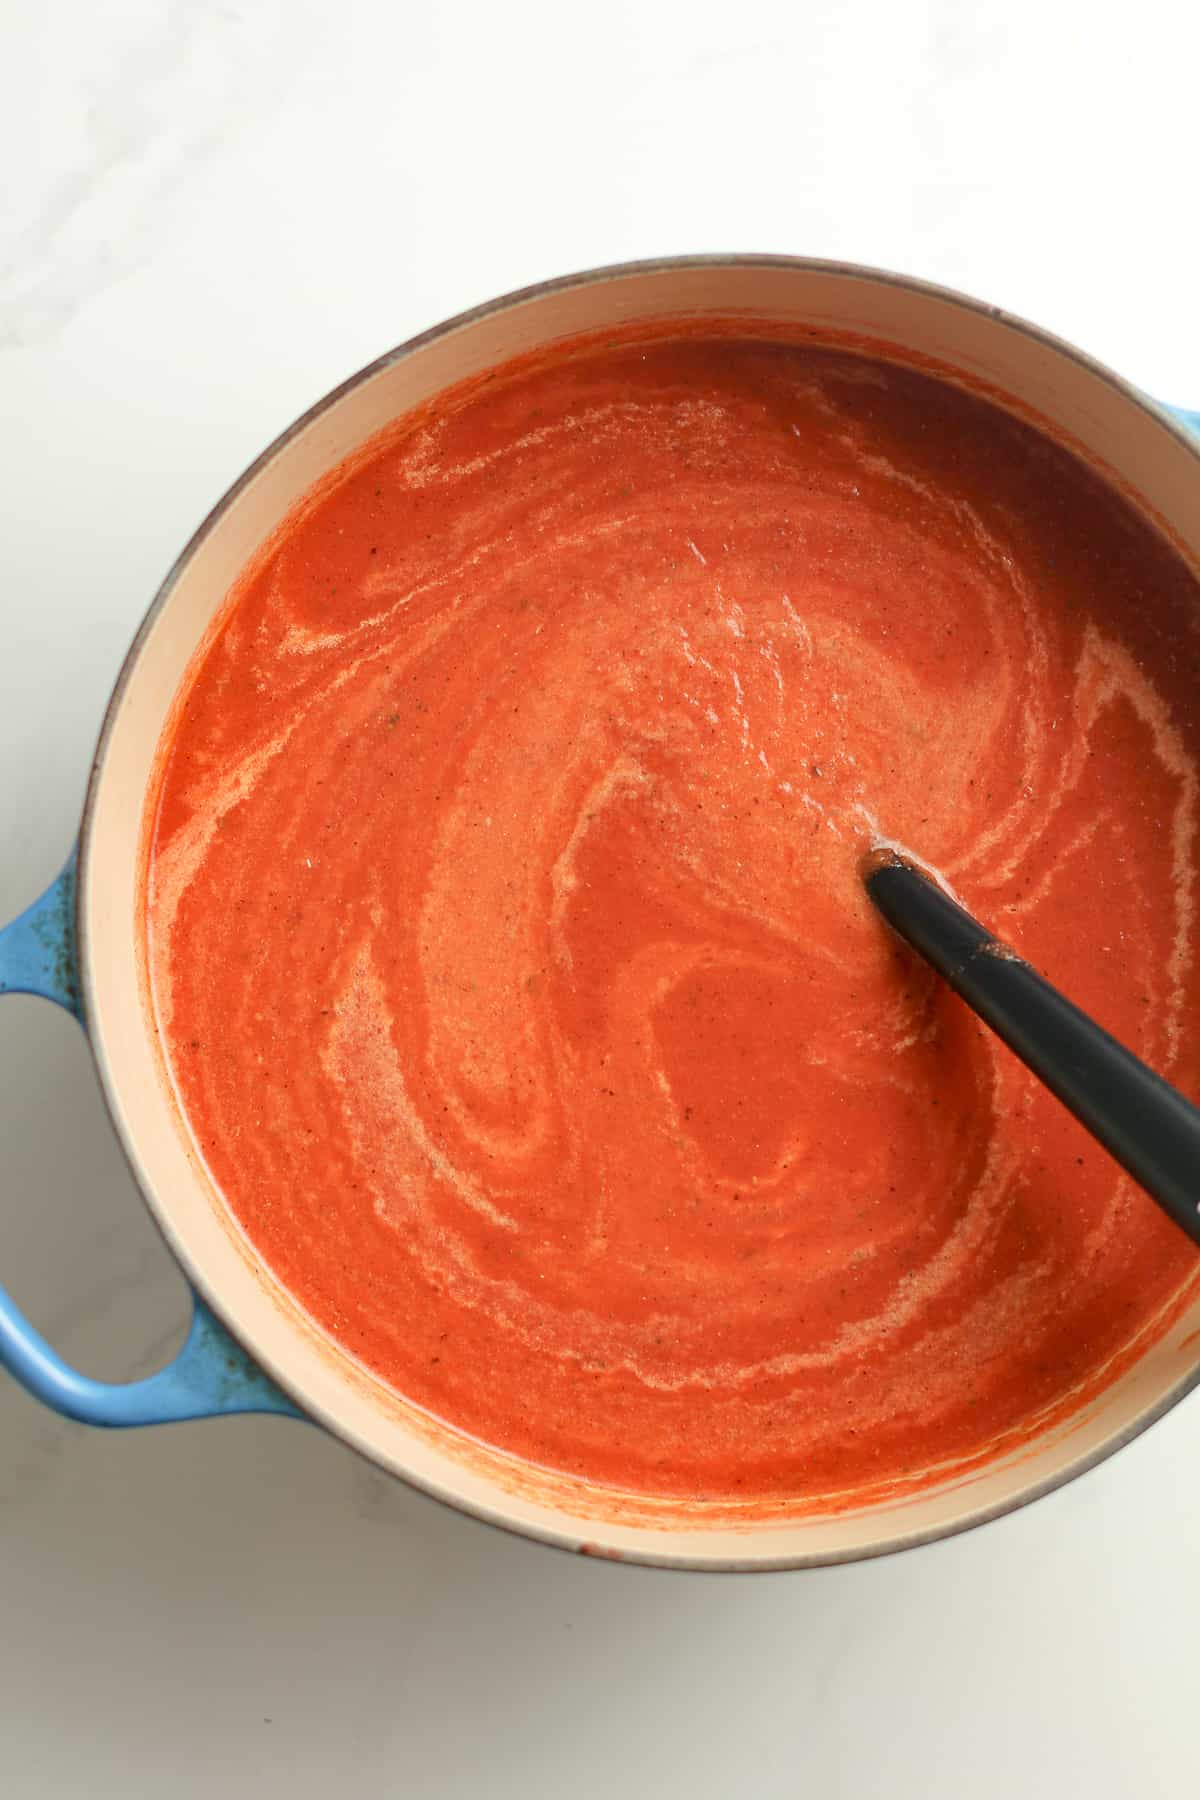 The pot of tomato soup with cream.